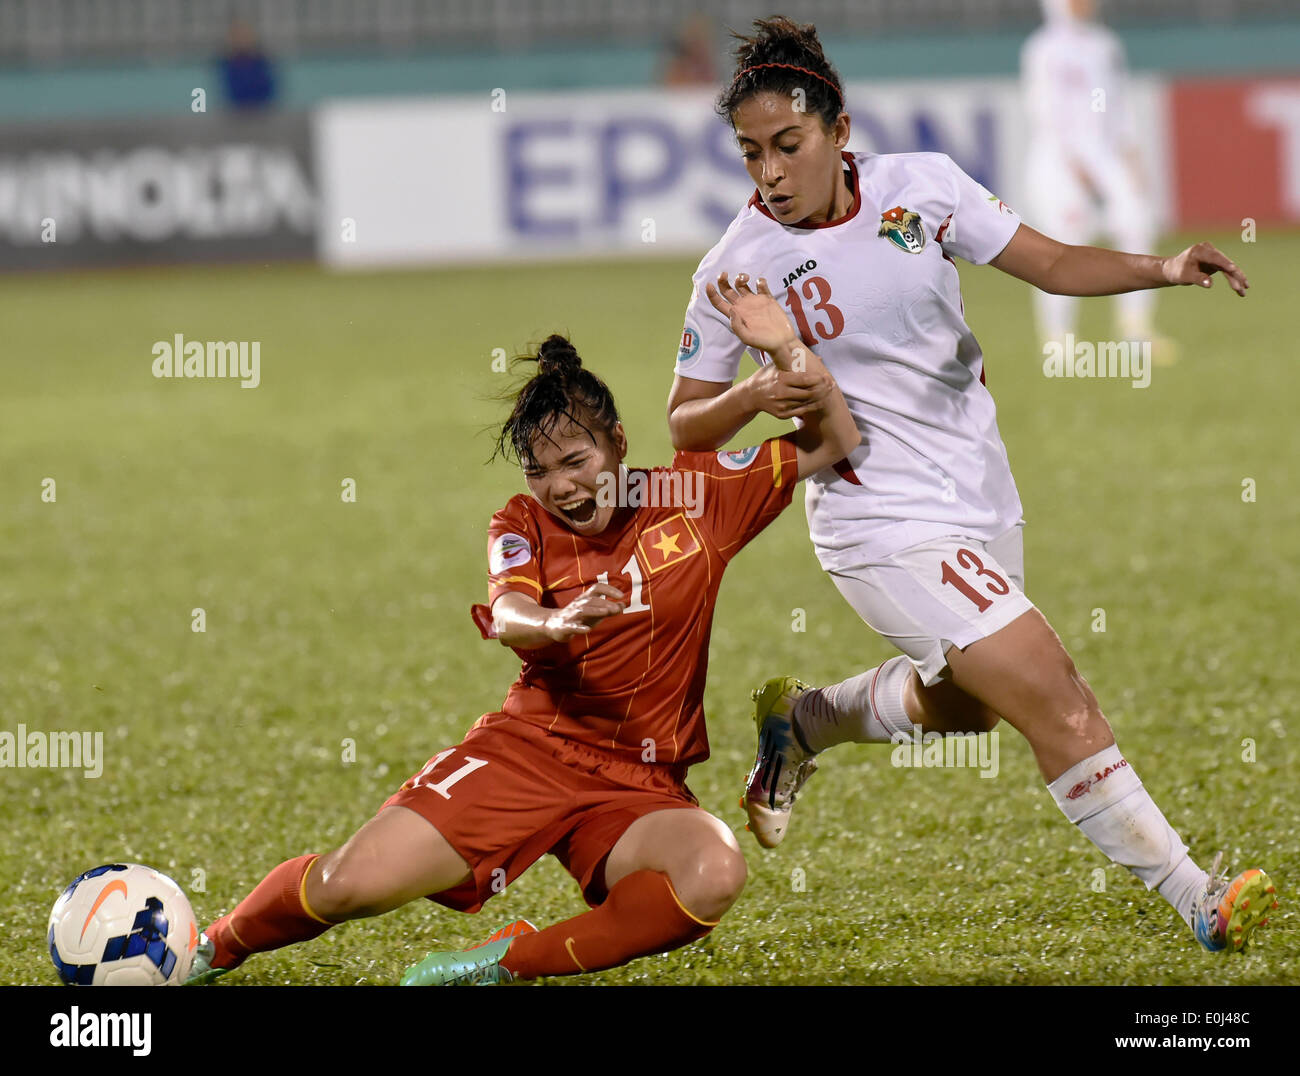 Ho Chi Minh City, Vietnam. 14th May, 2014. Vietnam's Nguyen Thi Nguyet (L) vies with Jordan's Ala'a Fouad Daowd Abu Kasheh during their Group A match at the 2014 AFC Women's Asian Cup held at Thong Nhat Stadium in Ho Chi Minh city, Vietnam, May 14, 2014. Vietnam beat Jordan 3-1. © He Jingjia/Xinhua/Alamy Live News Stock Photo